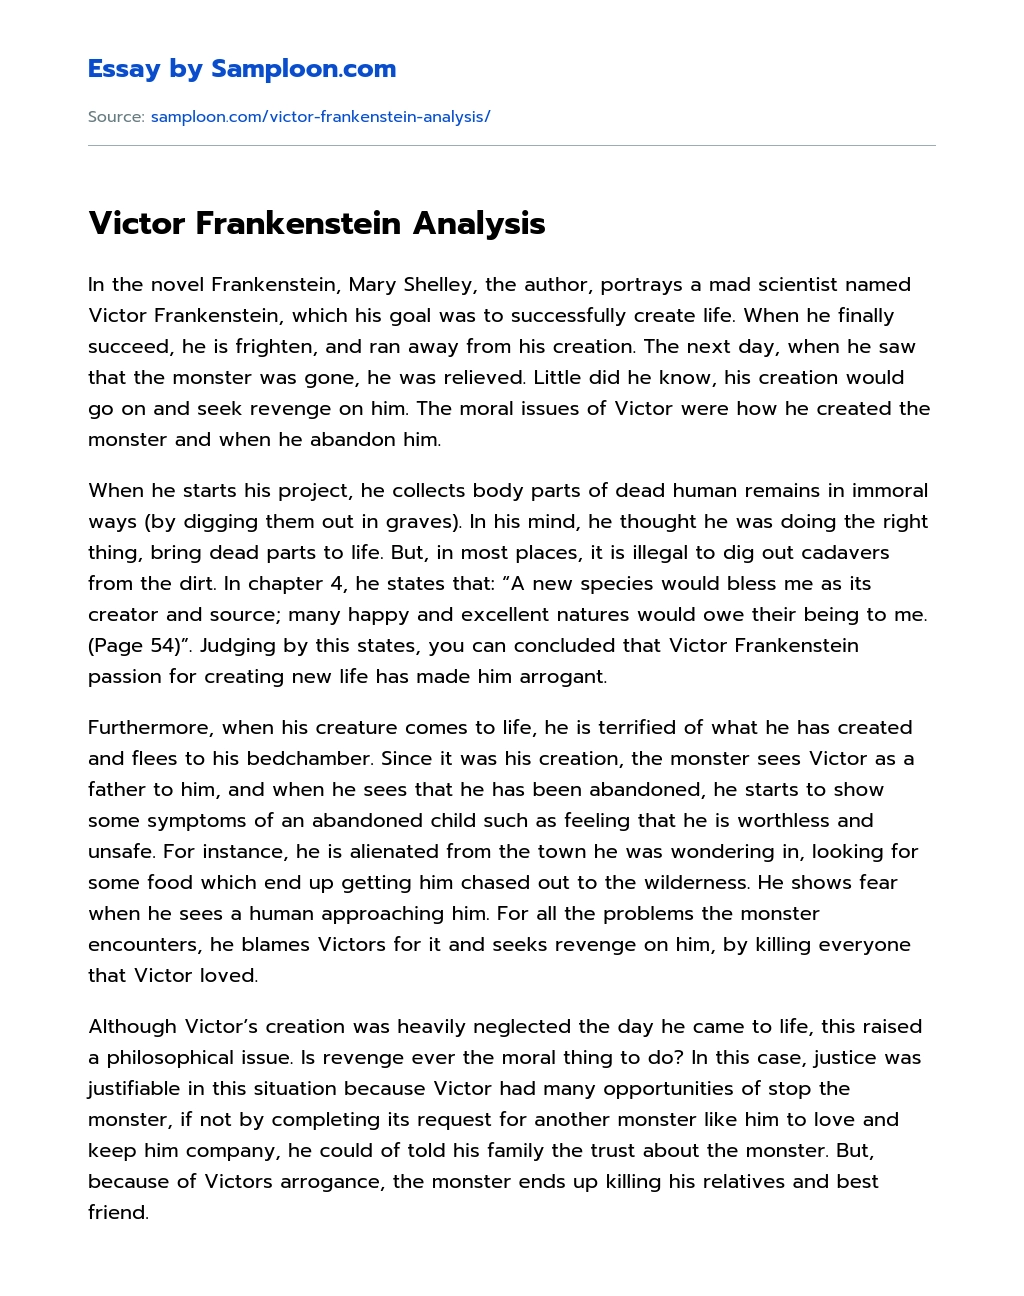 essay questions about victor frankenstein